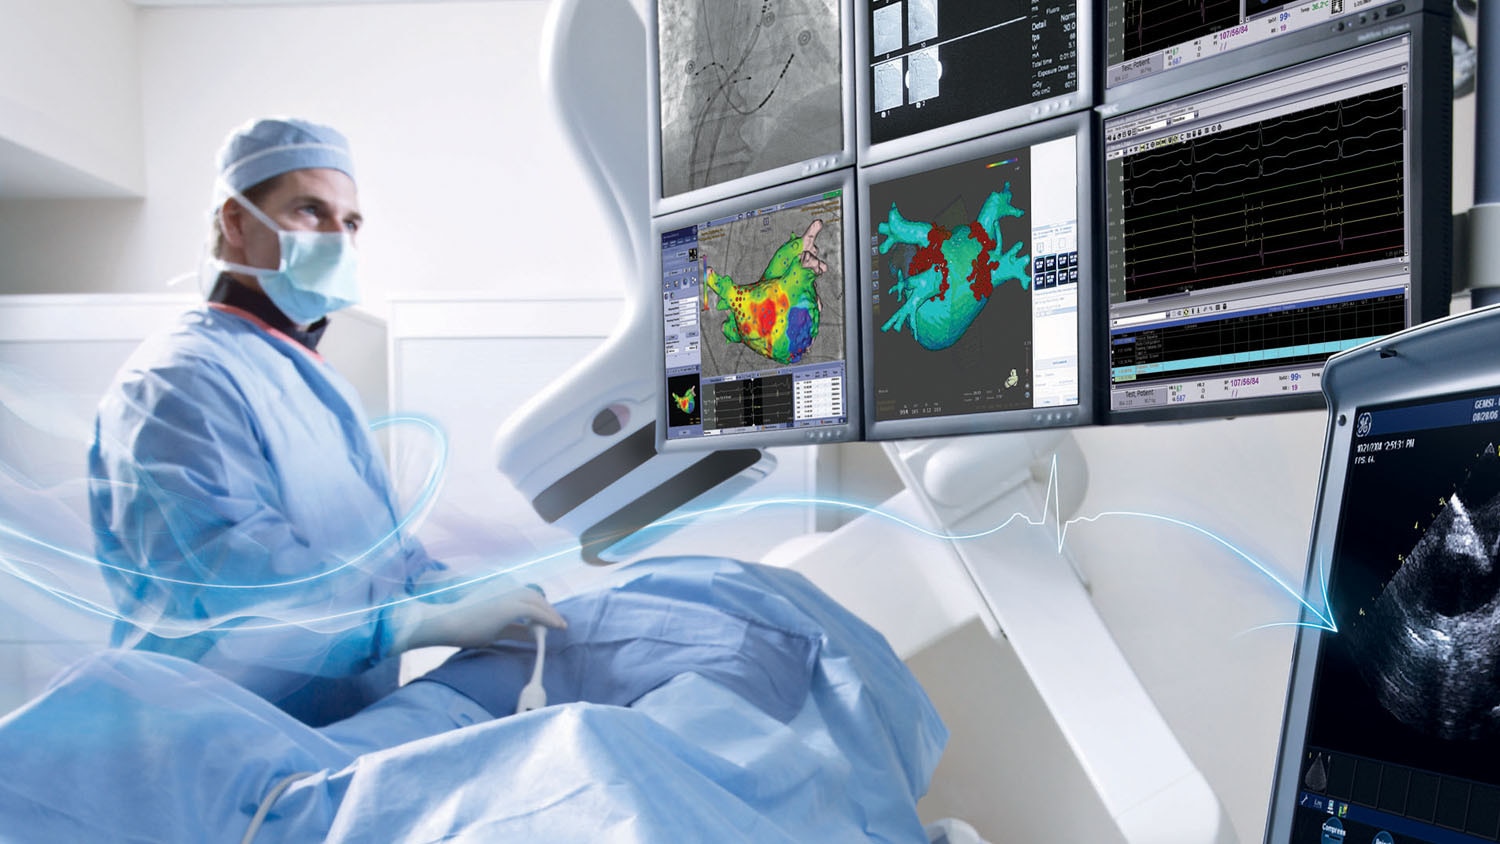 ion-product-education-clinical-interventional-systems-education-interventional-systems_jpg